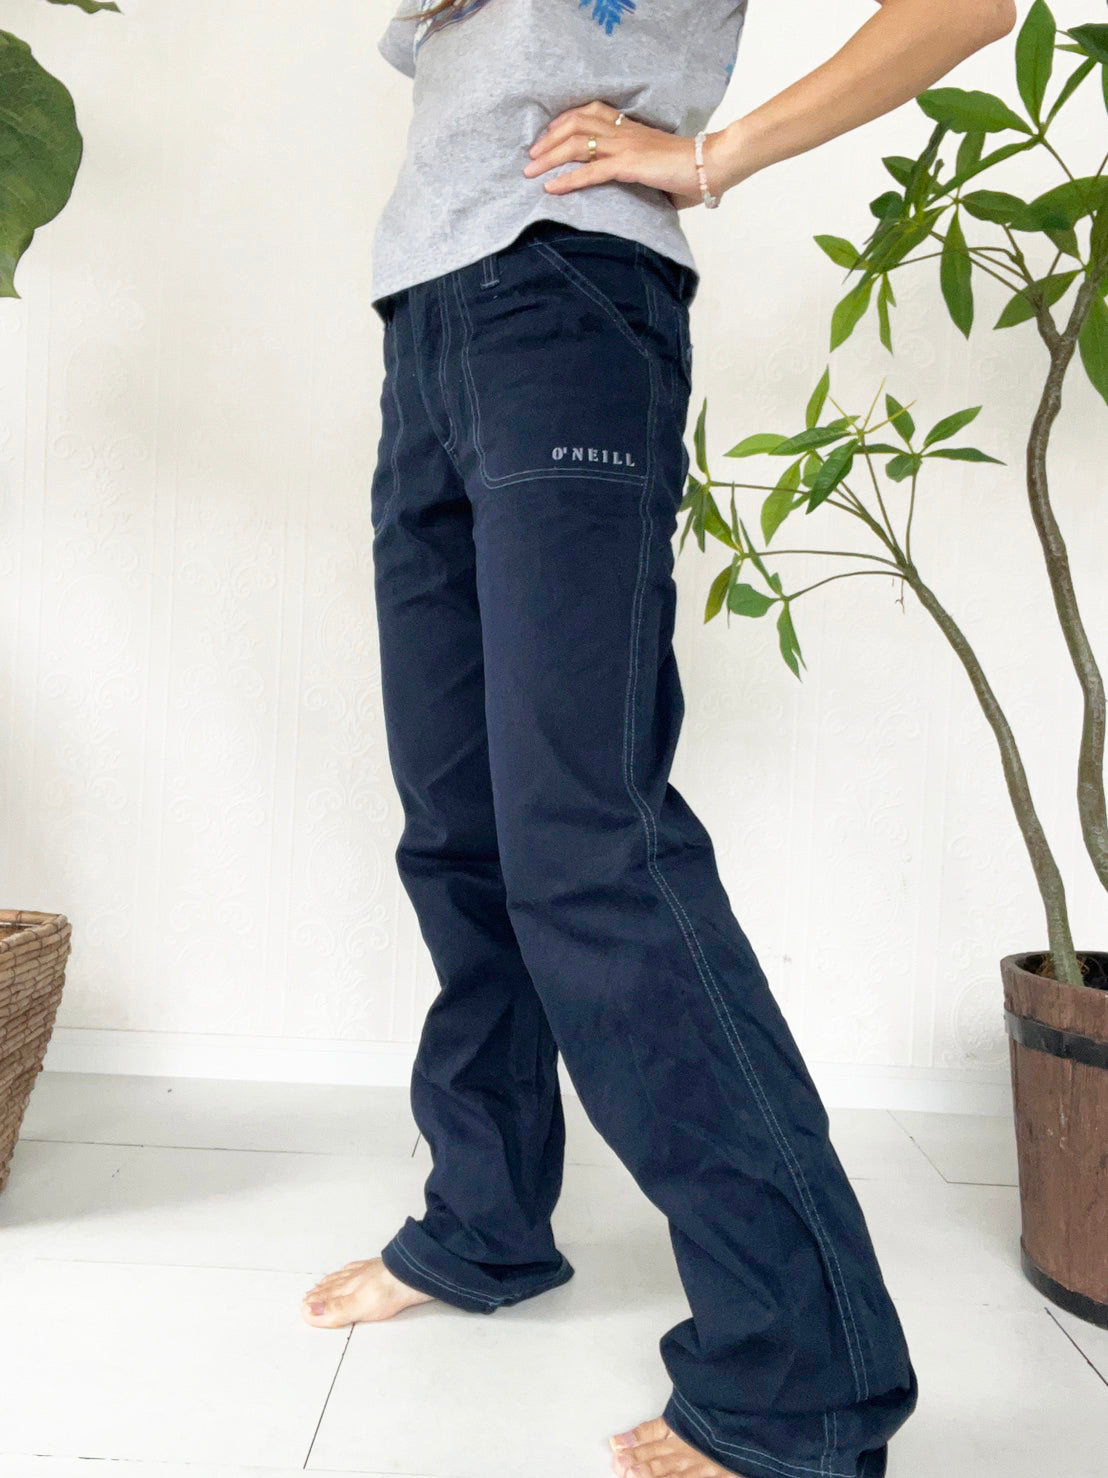 【O'neill】 00's O'neill Y2K surf cotton pants NAVY (size 3 ※women's L相当なのですが実際はMぐらいに感じます)